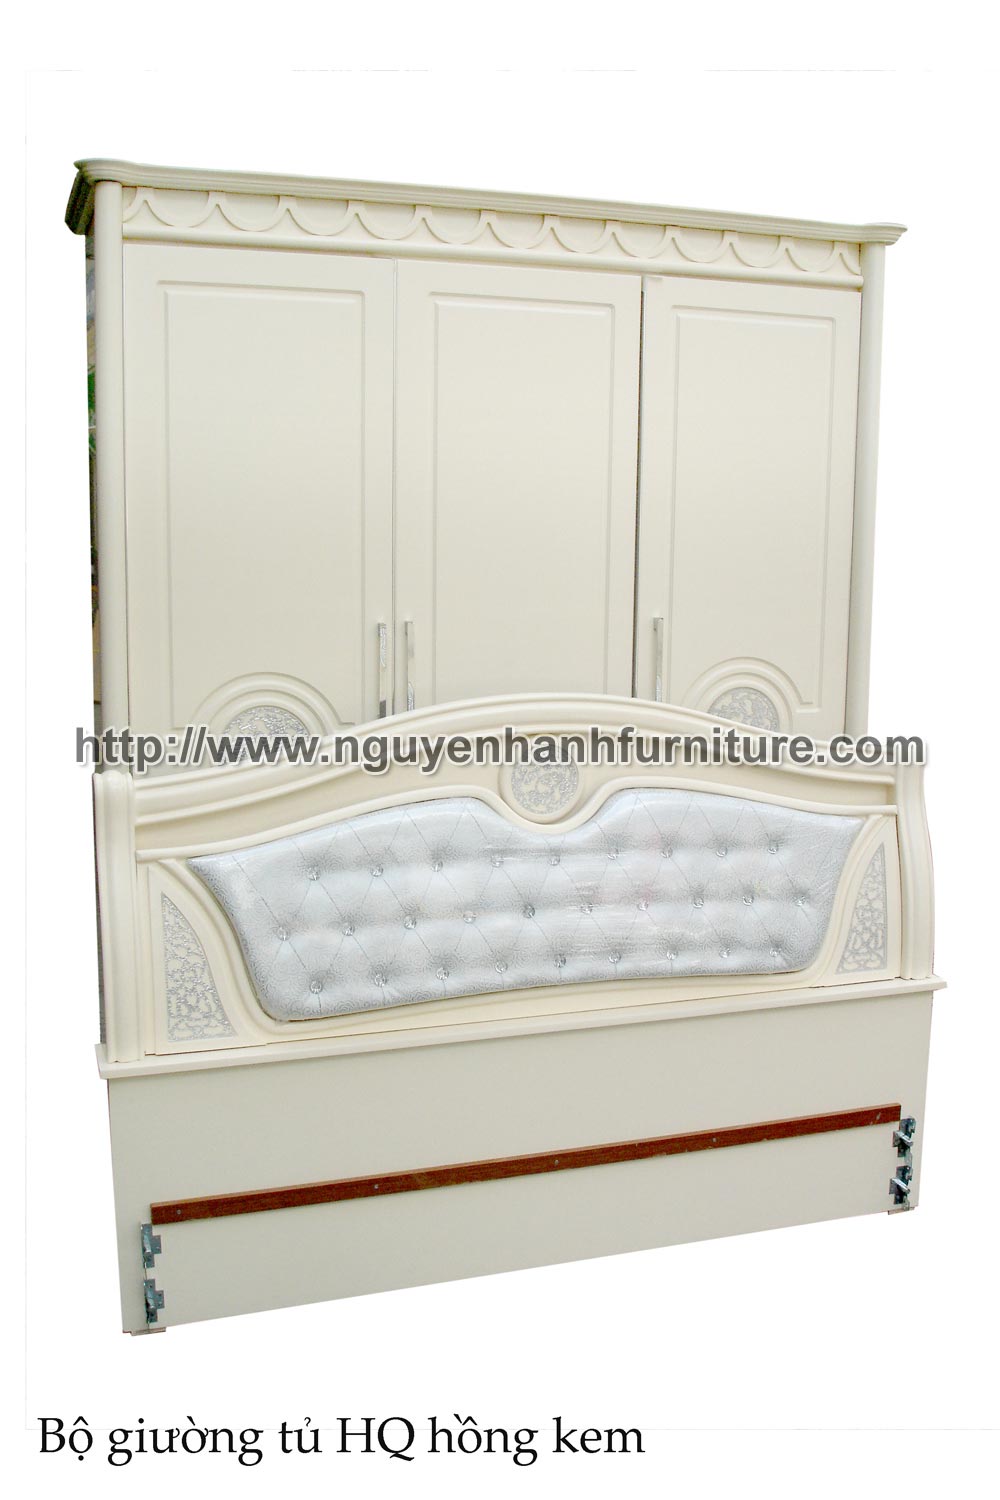 Name product: Pinky South Korean style Set of Wardrobe and Bed  - Dimensions: 60 x 160 x 210cm - Description: MDF 